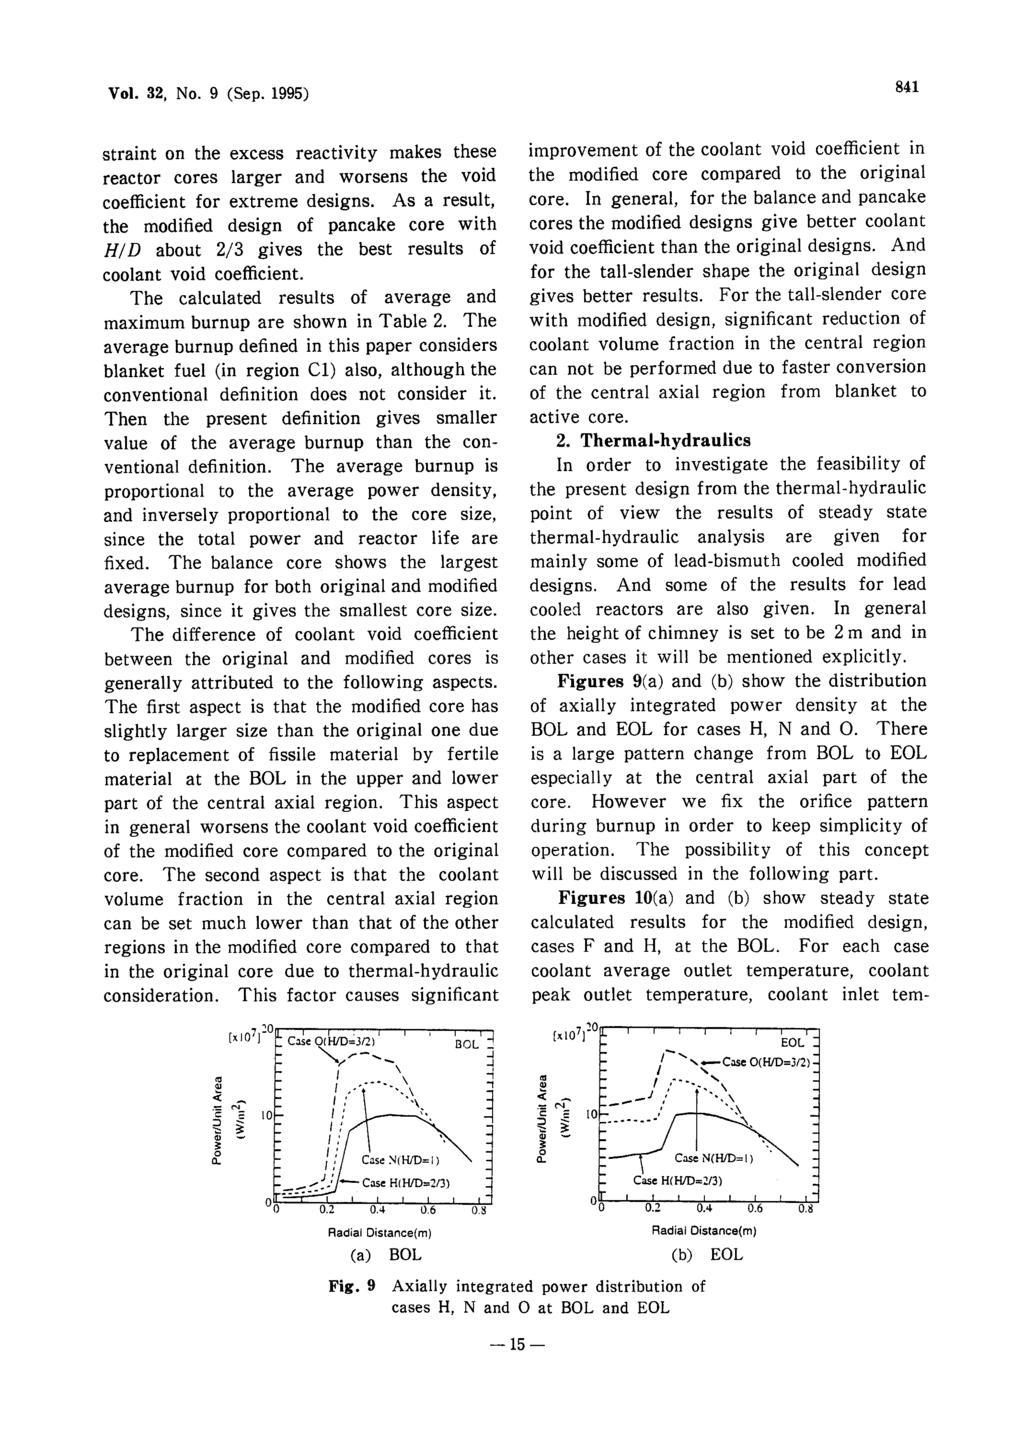 Vol. 32, No. 9 (Sep. 1995) 841 straint on the excess reactivity makes these reactor cores larger and worsens the void coefficient for extreme designs.